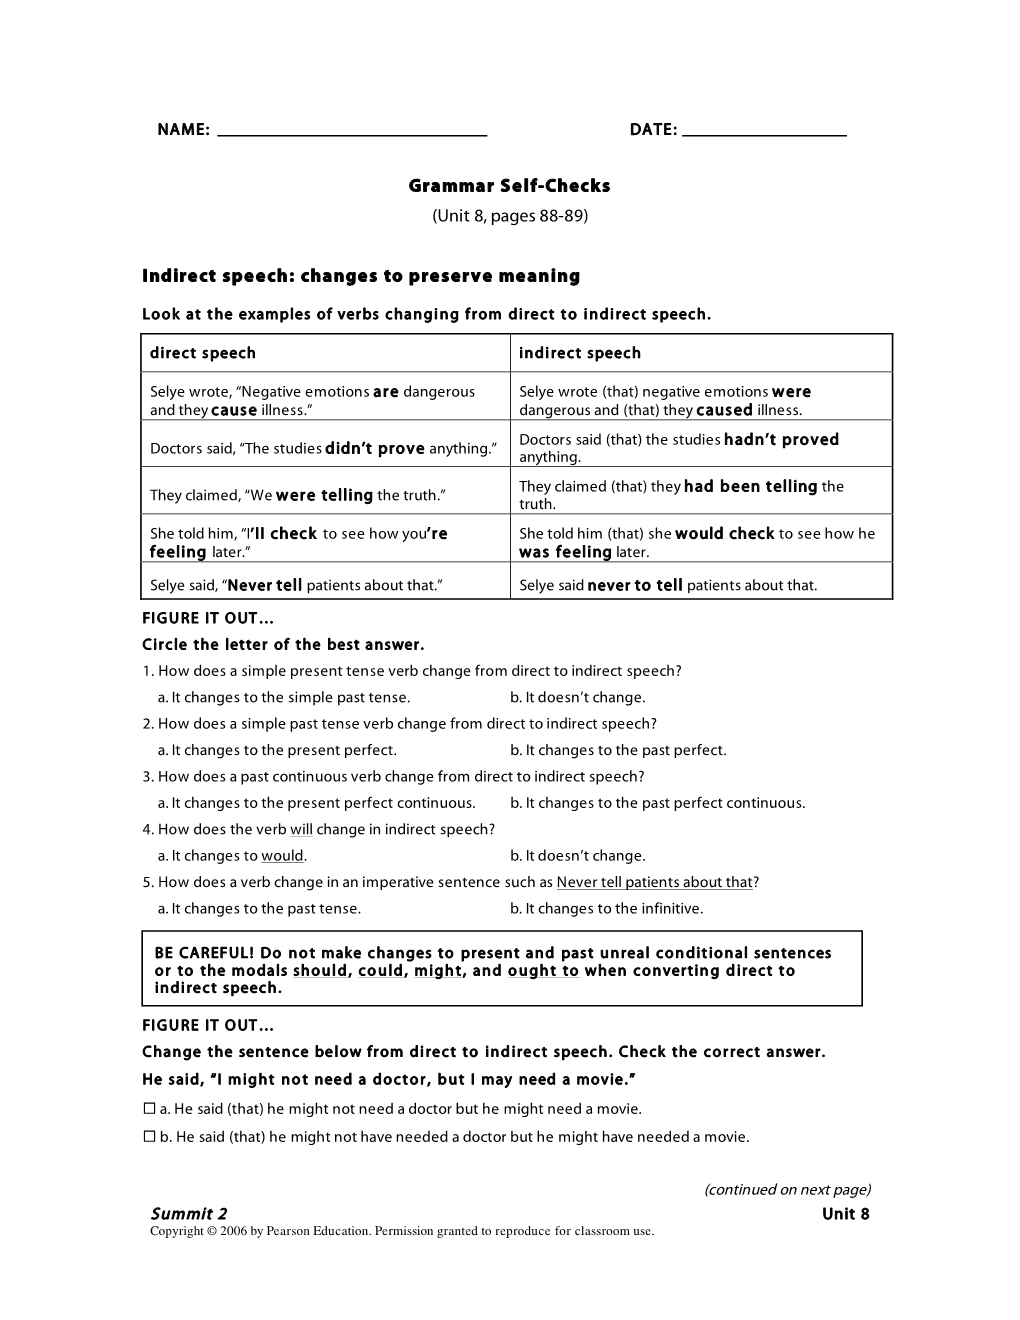 Grammar Self-Checks (Unit 8, Pages 88-89) Indirect Speech: Changes To